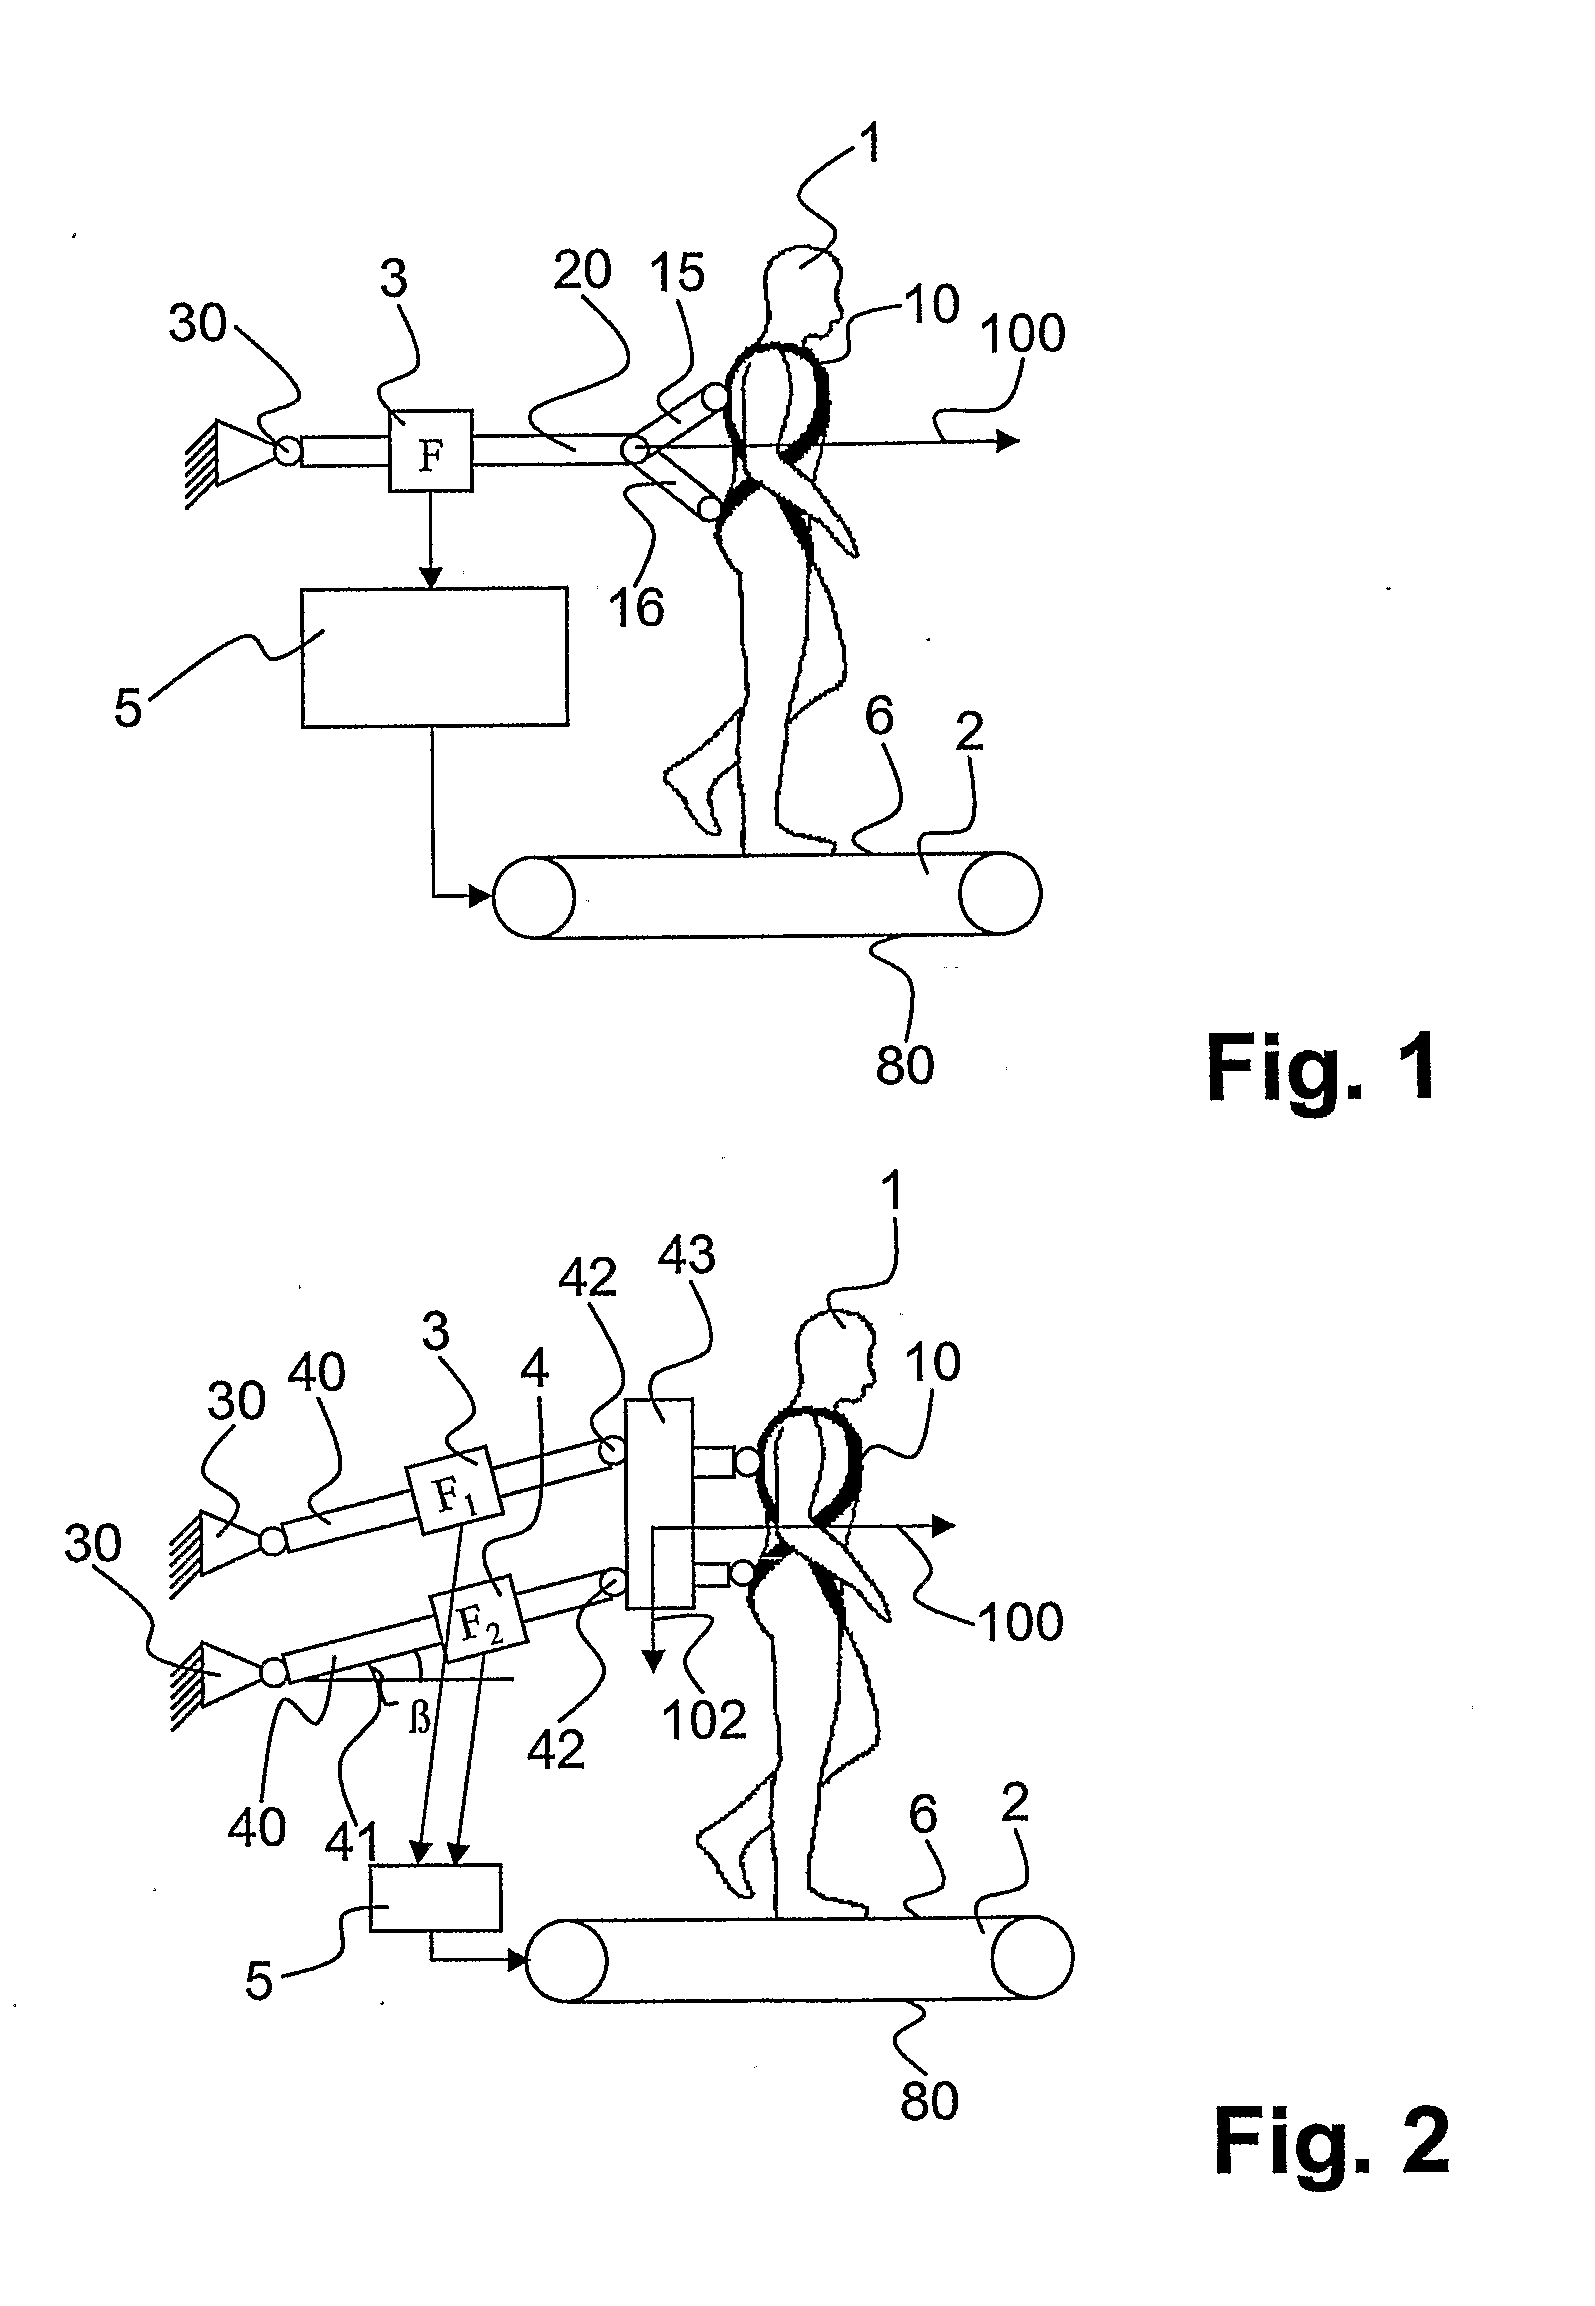 Device and Method for an Automatic Treadmill Therapy